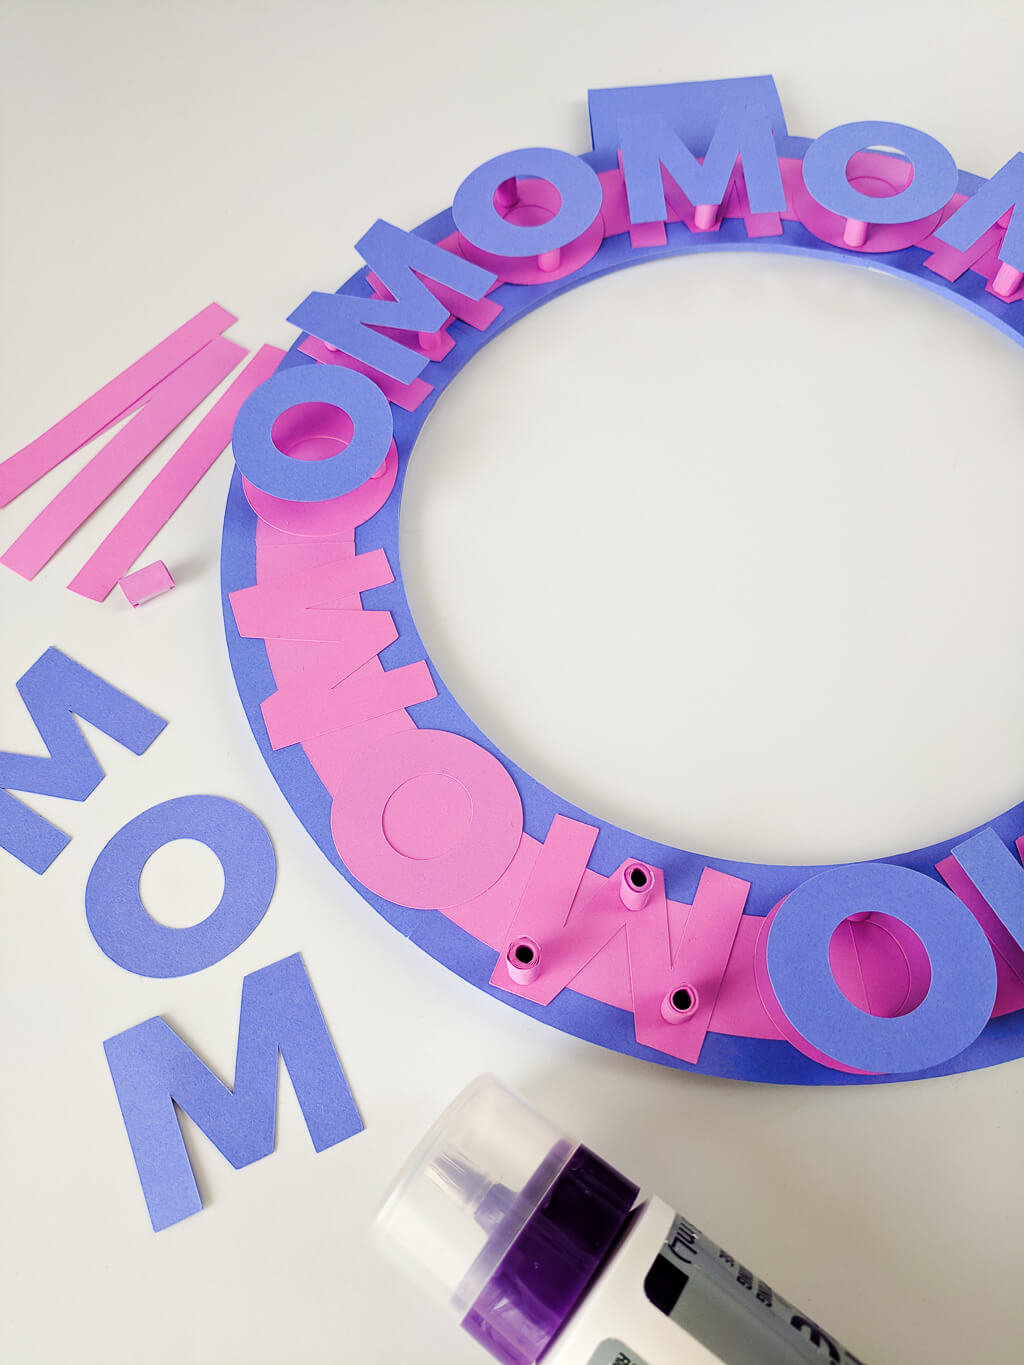 Making a DIY Mother's Day wreath project